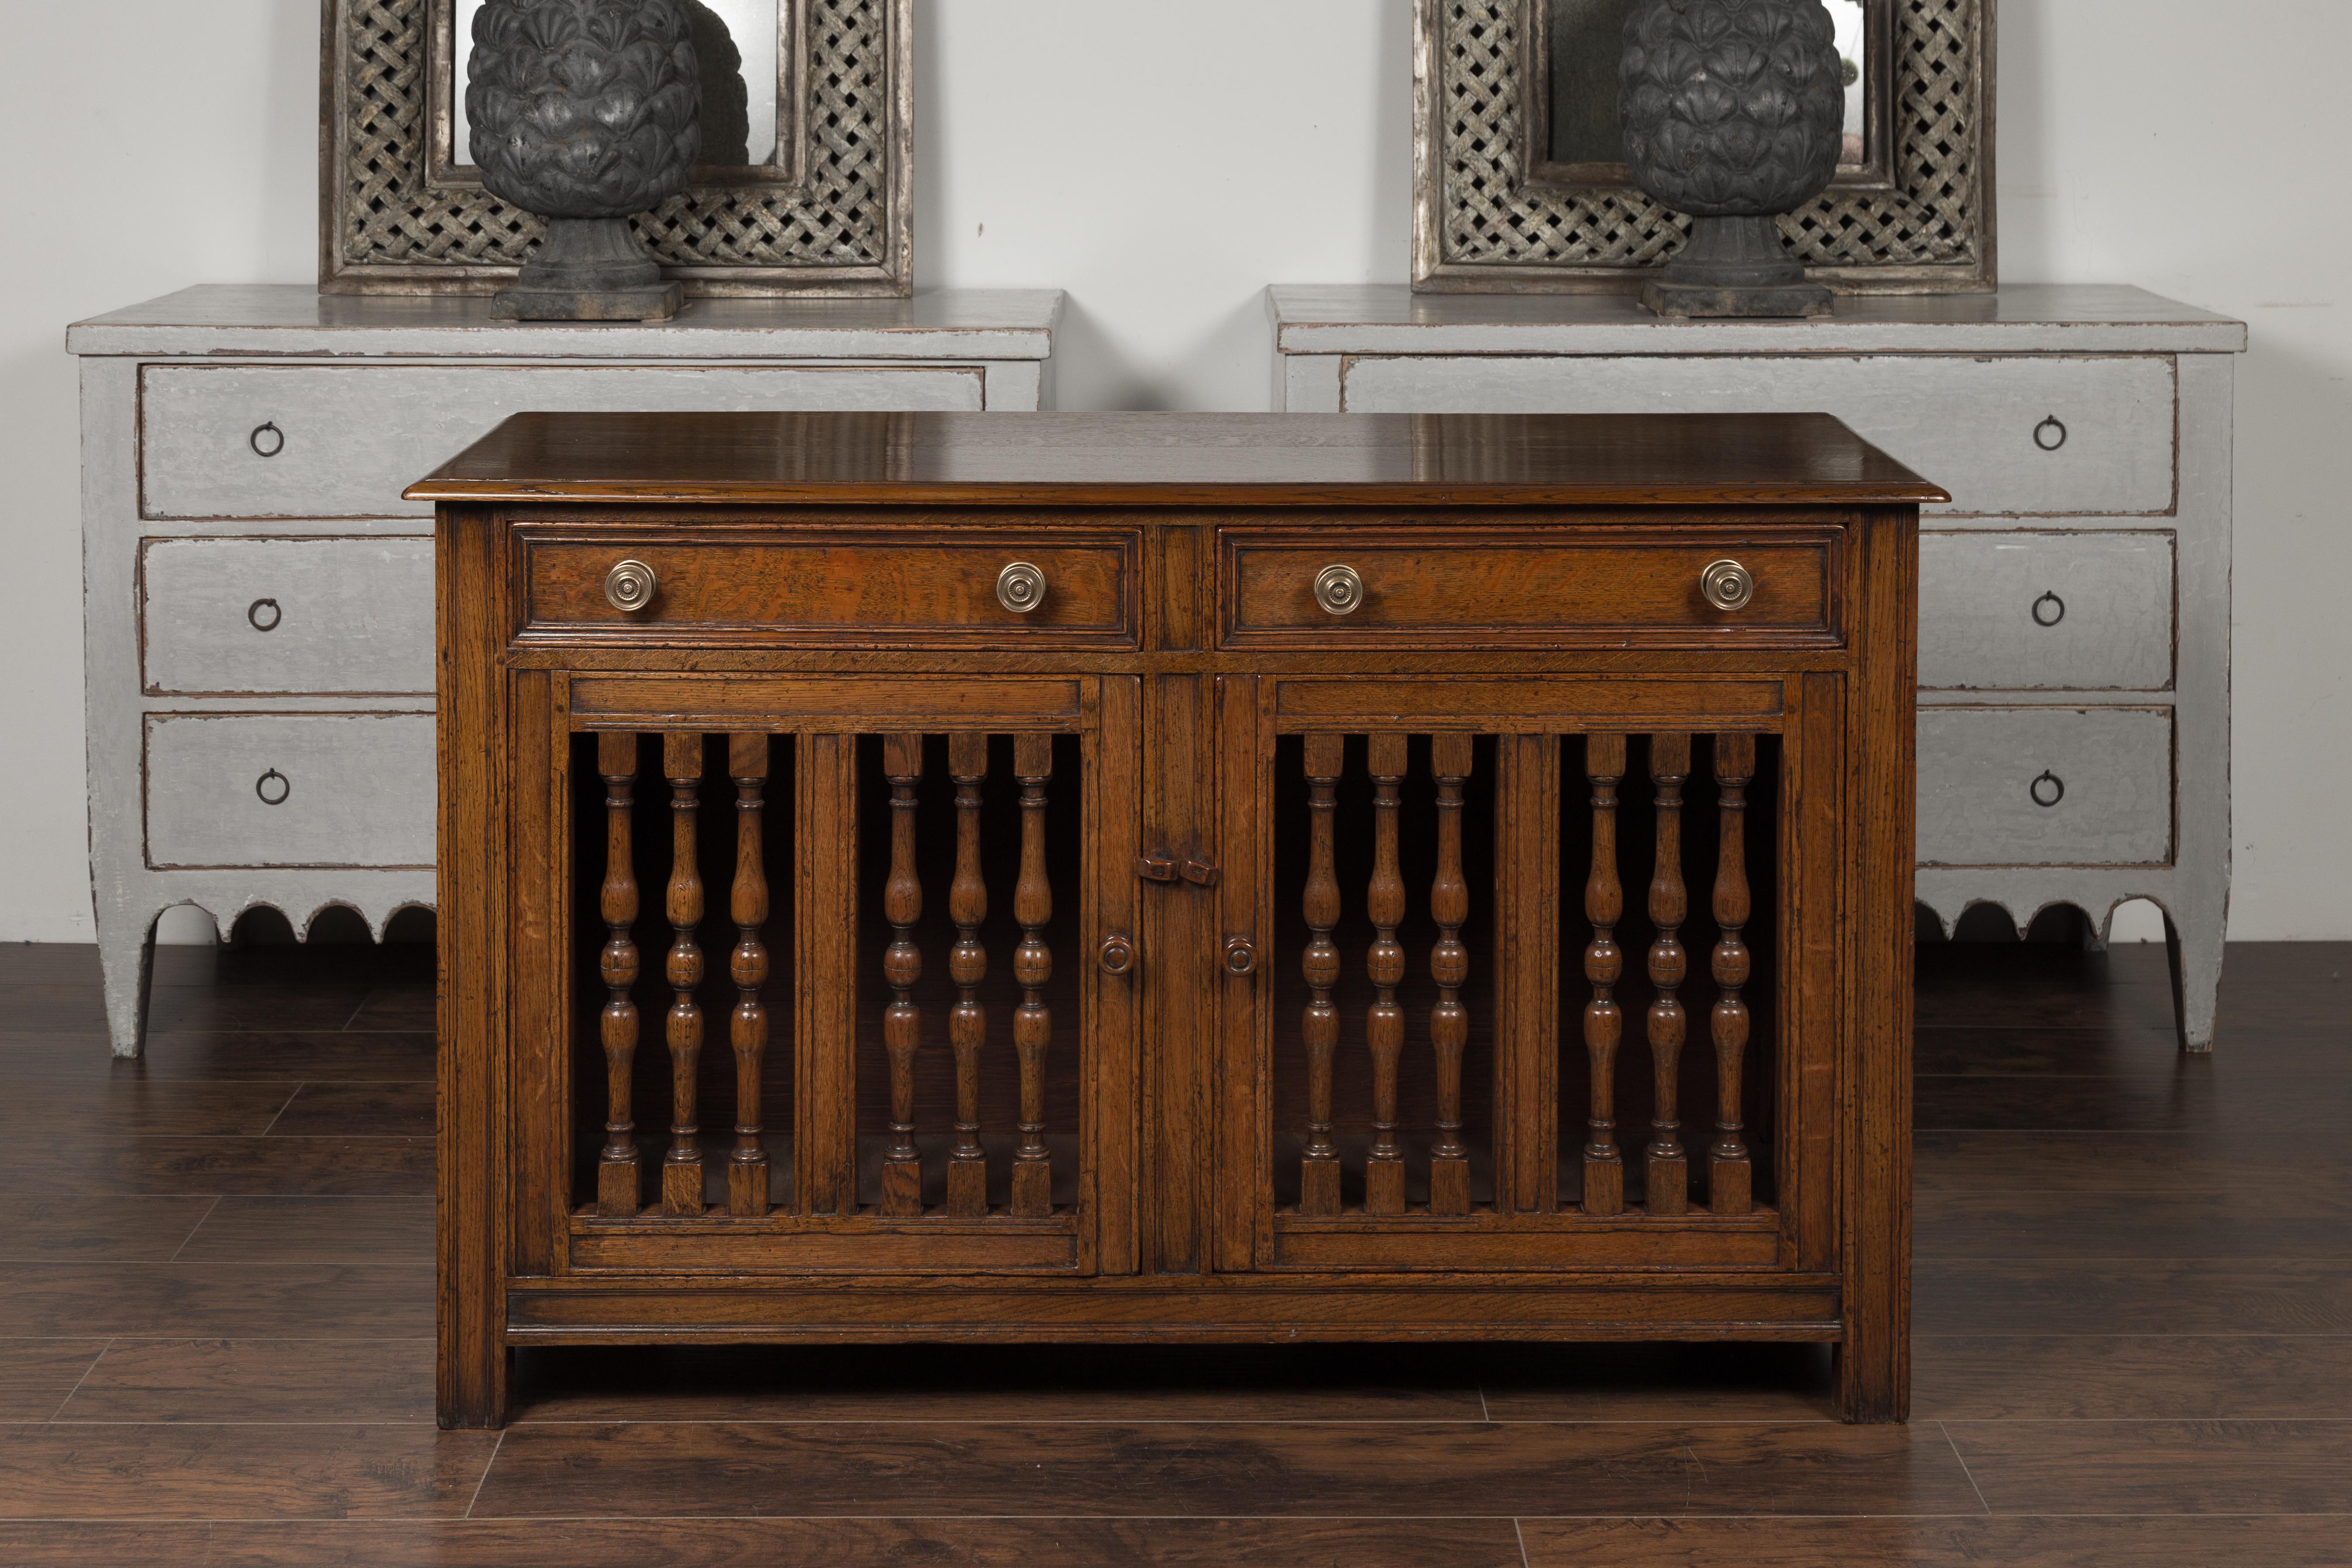 An English oak buffet from the mid-19th century, with two drawers, two doors and turned balusters. Born in England during the third quarter of the 19th century, this oak buffet features a rectangular top with beveled edges, sitting above two